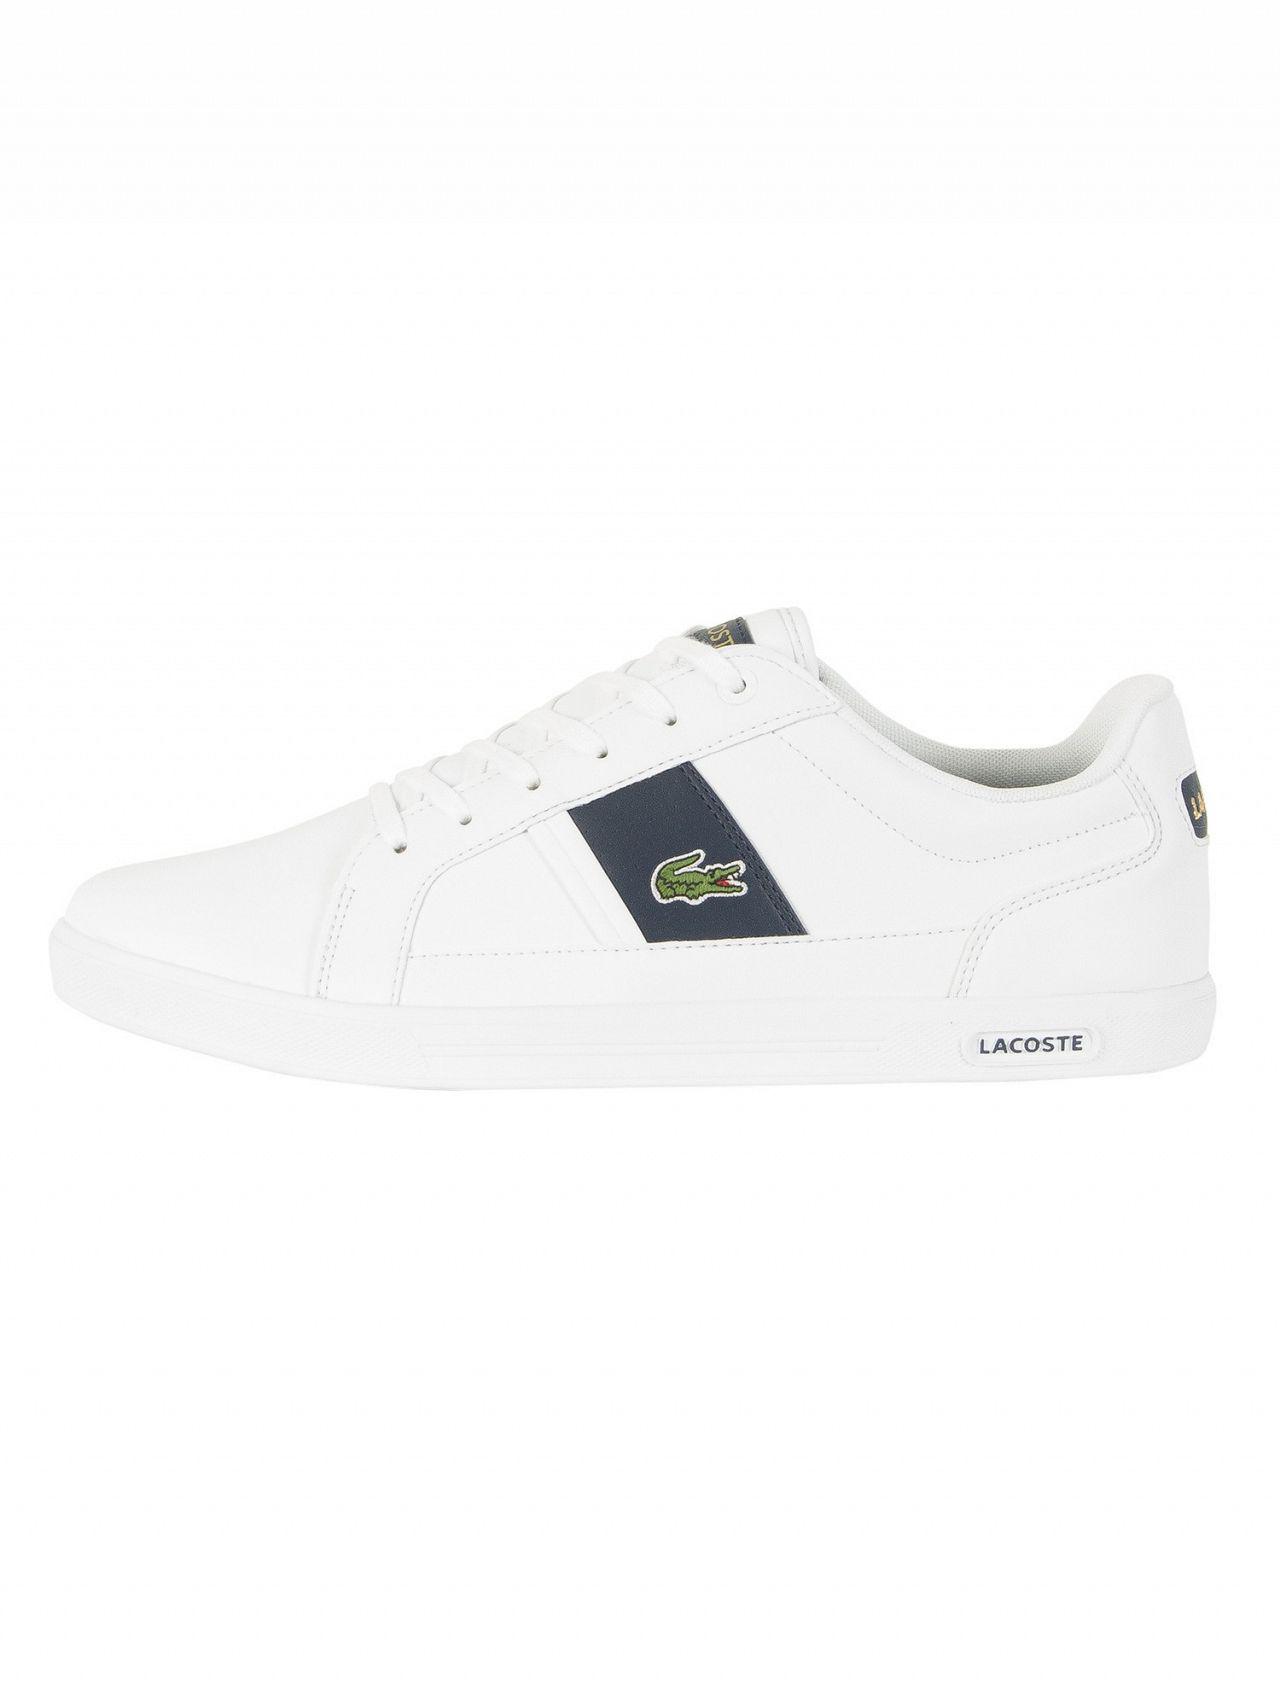 Lacoste White/navy Europa 118 1 Qsp Spm Leather Trainers for Men | Lyst